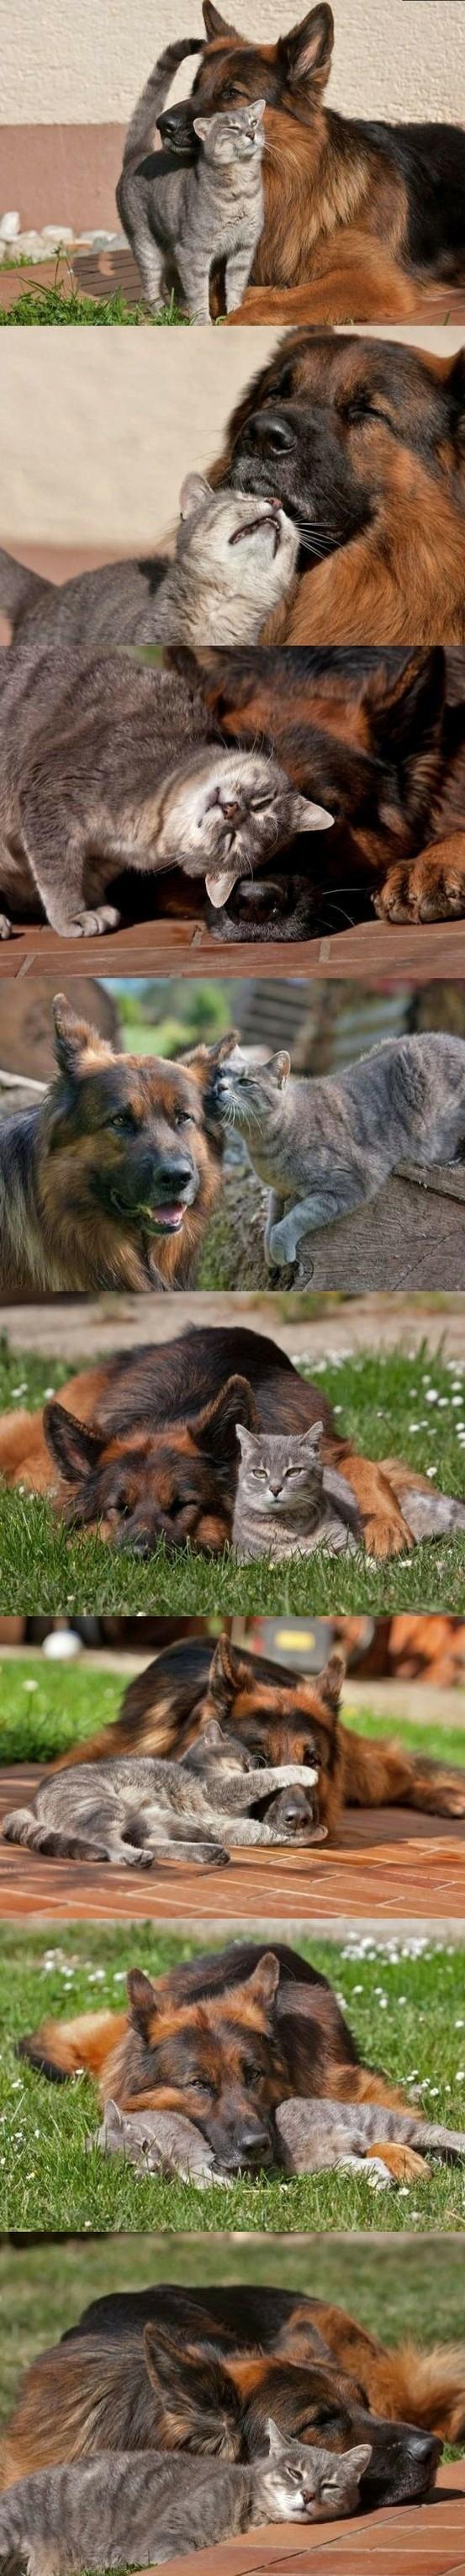 dog cat friendship The 10 Most Adorable Animal Friendships